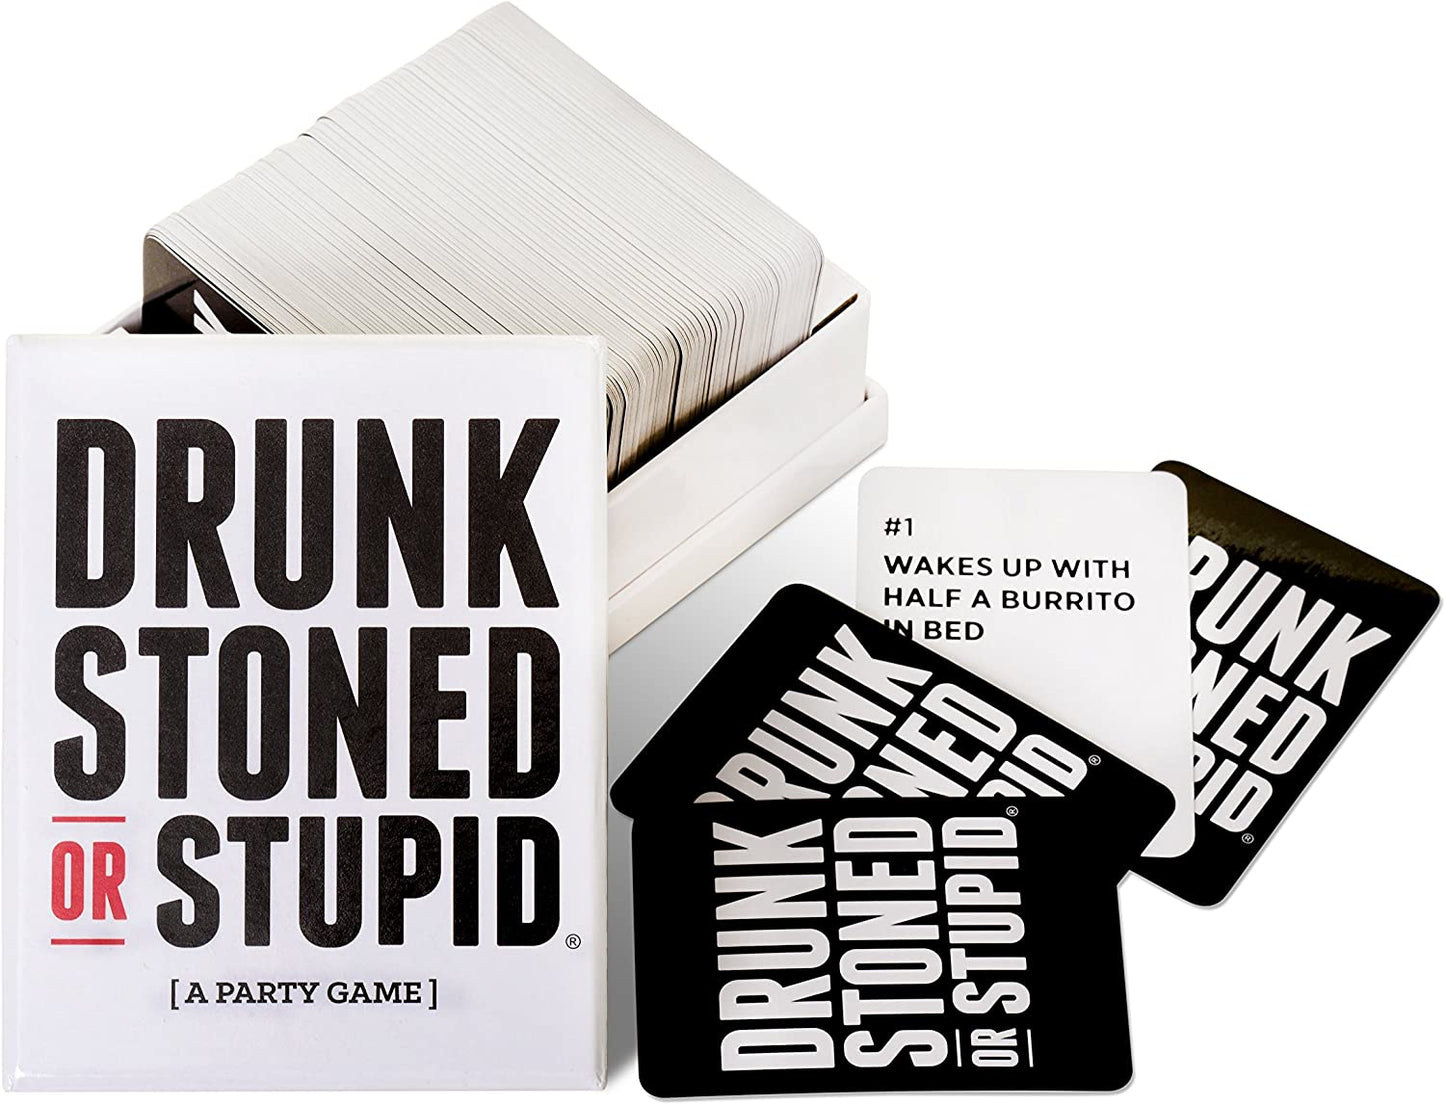 Drunk Stoned or Stupid [A Party Game]